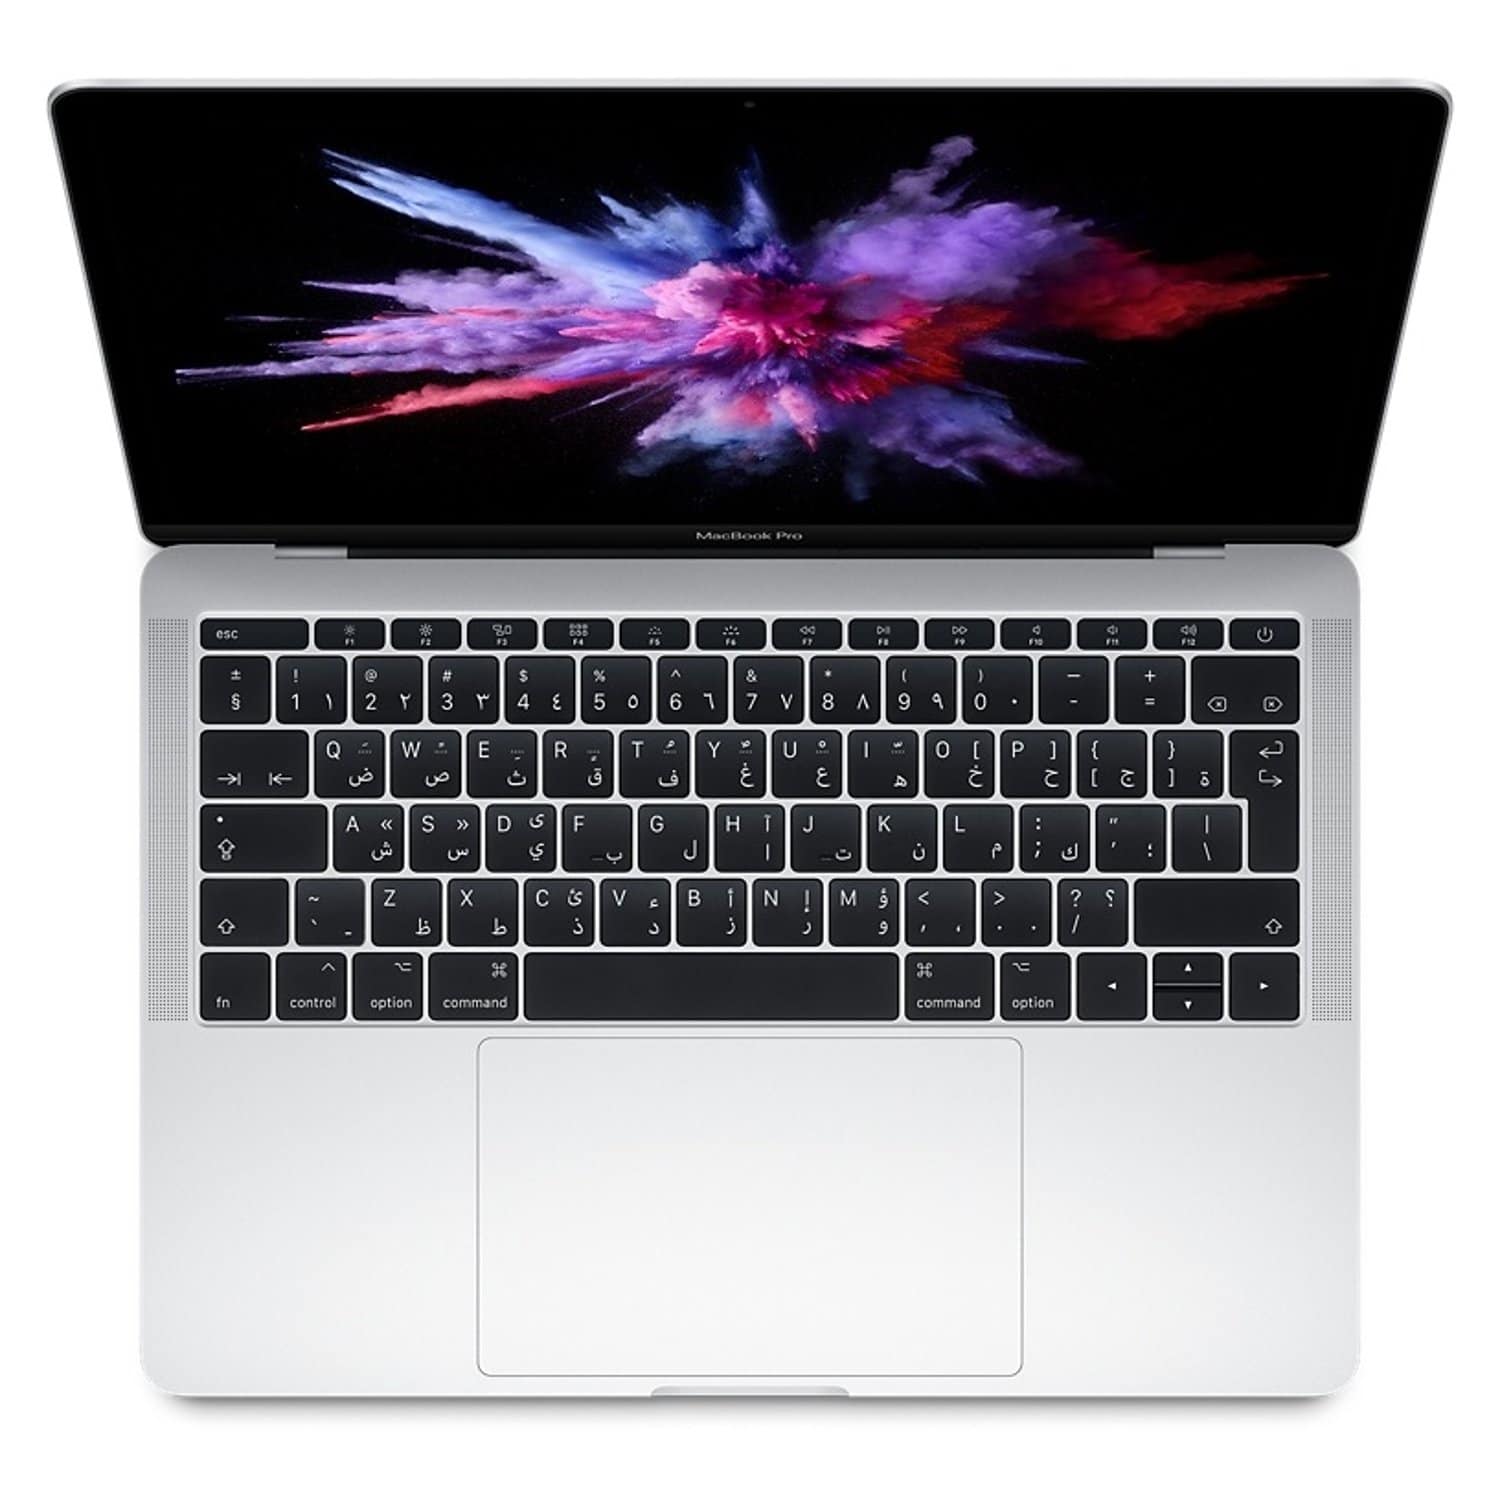 MacBook Pro 13 2017 Core i7 2.5GHz 16GB 128GB Silver front